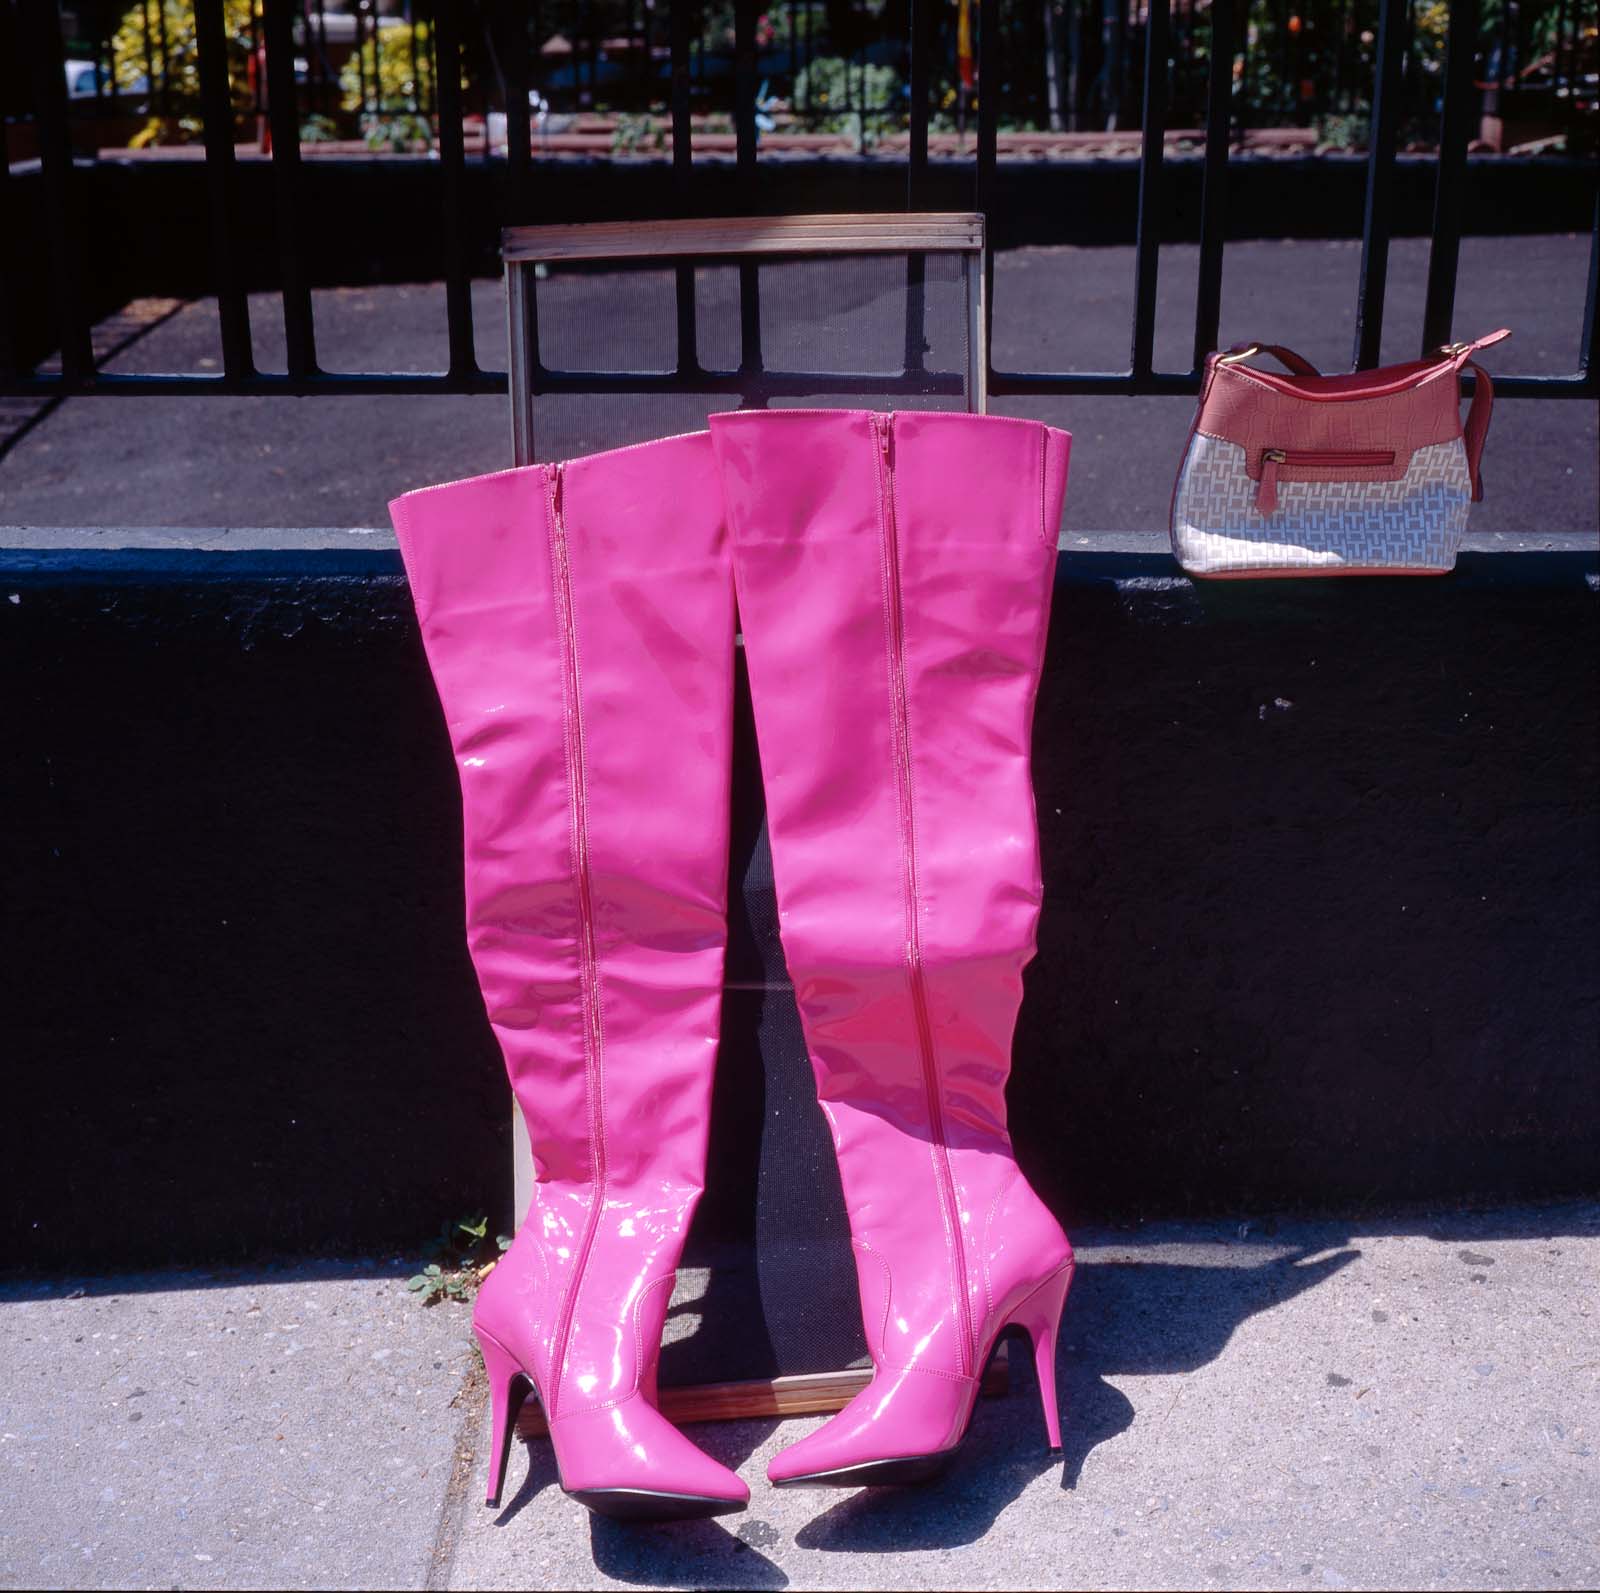 "Hot Pink Boots on Sale"	Brooklyn, NY 2009